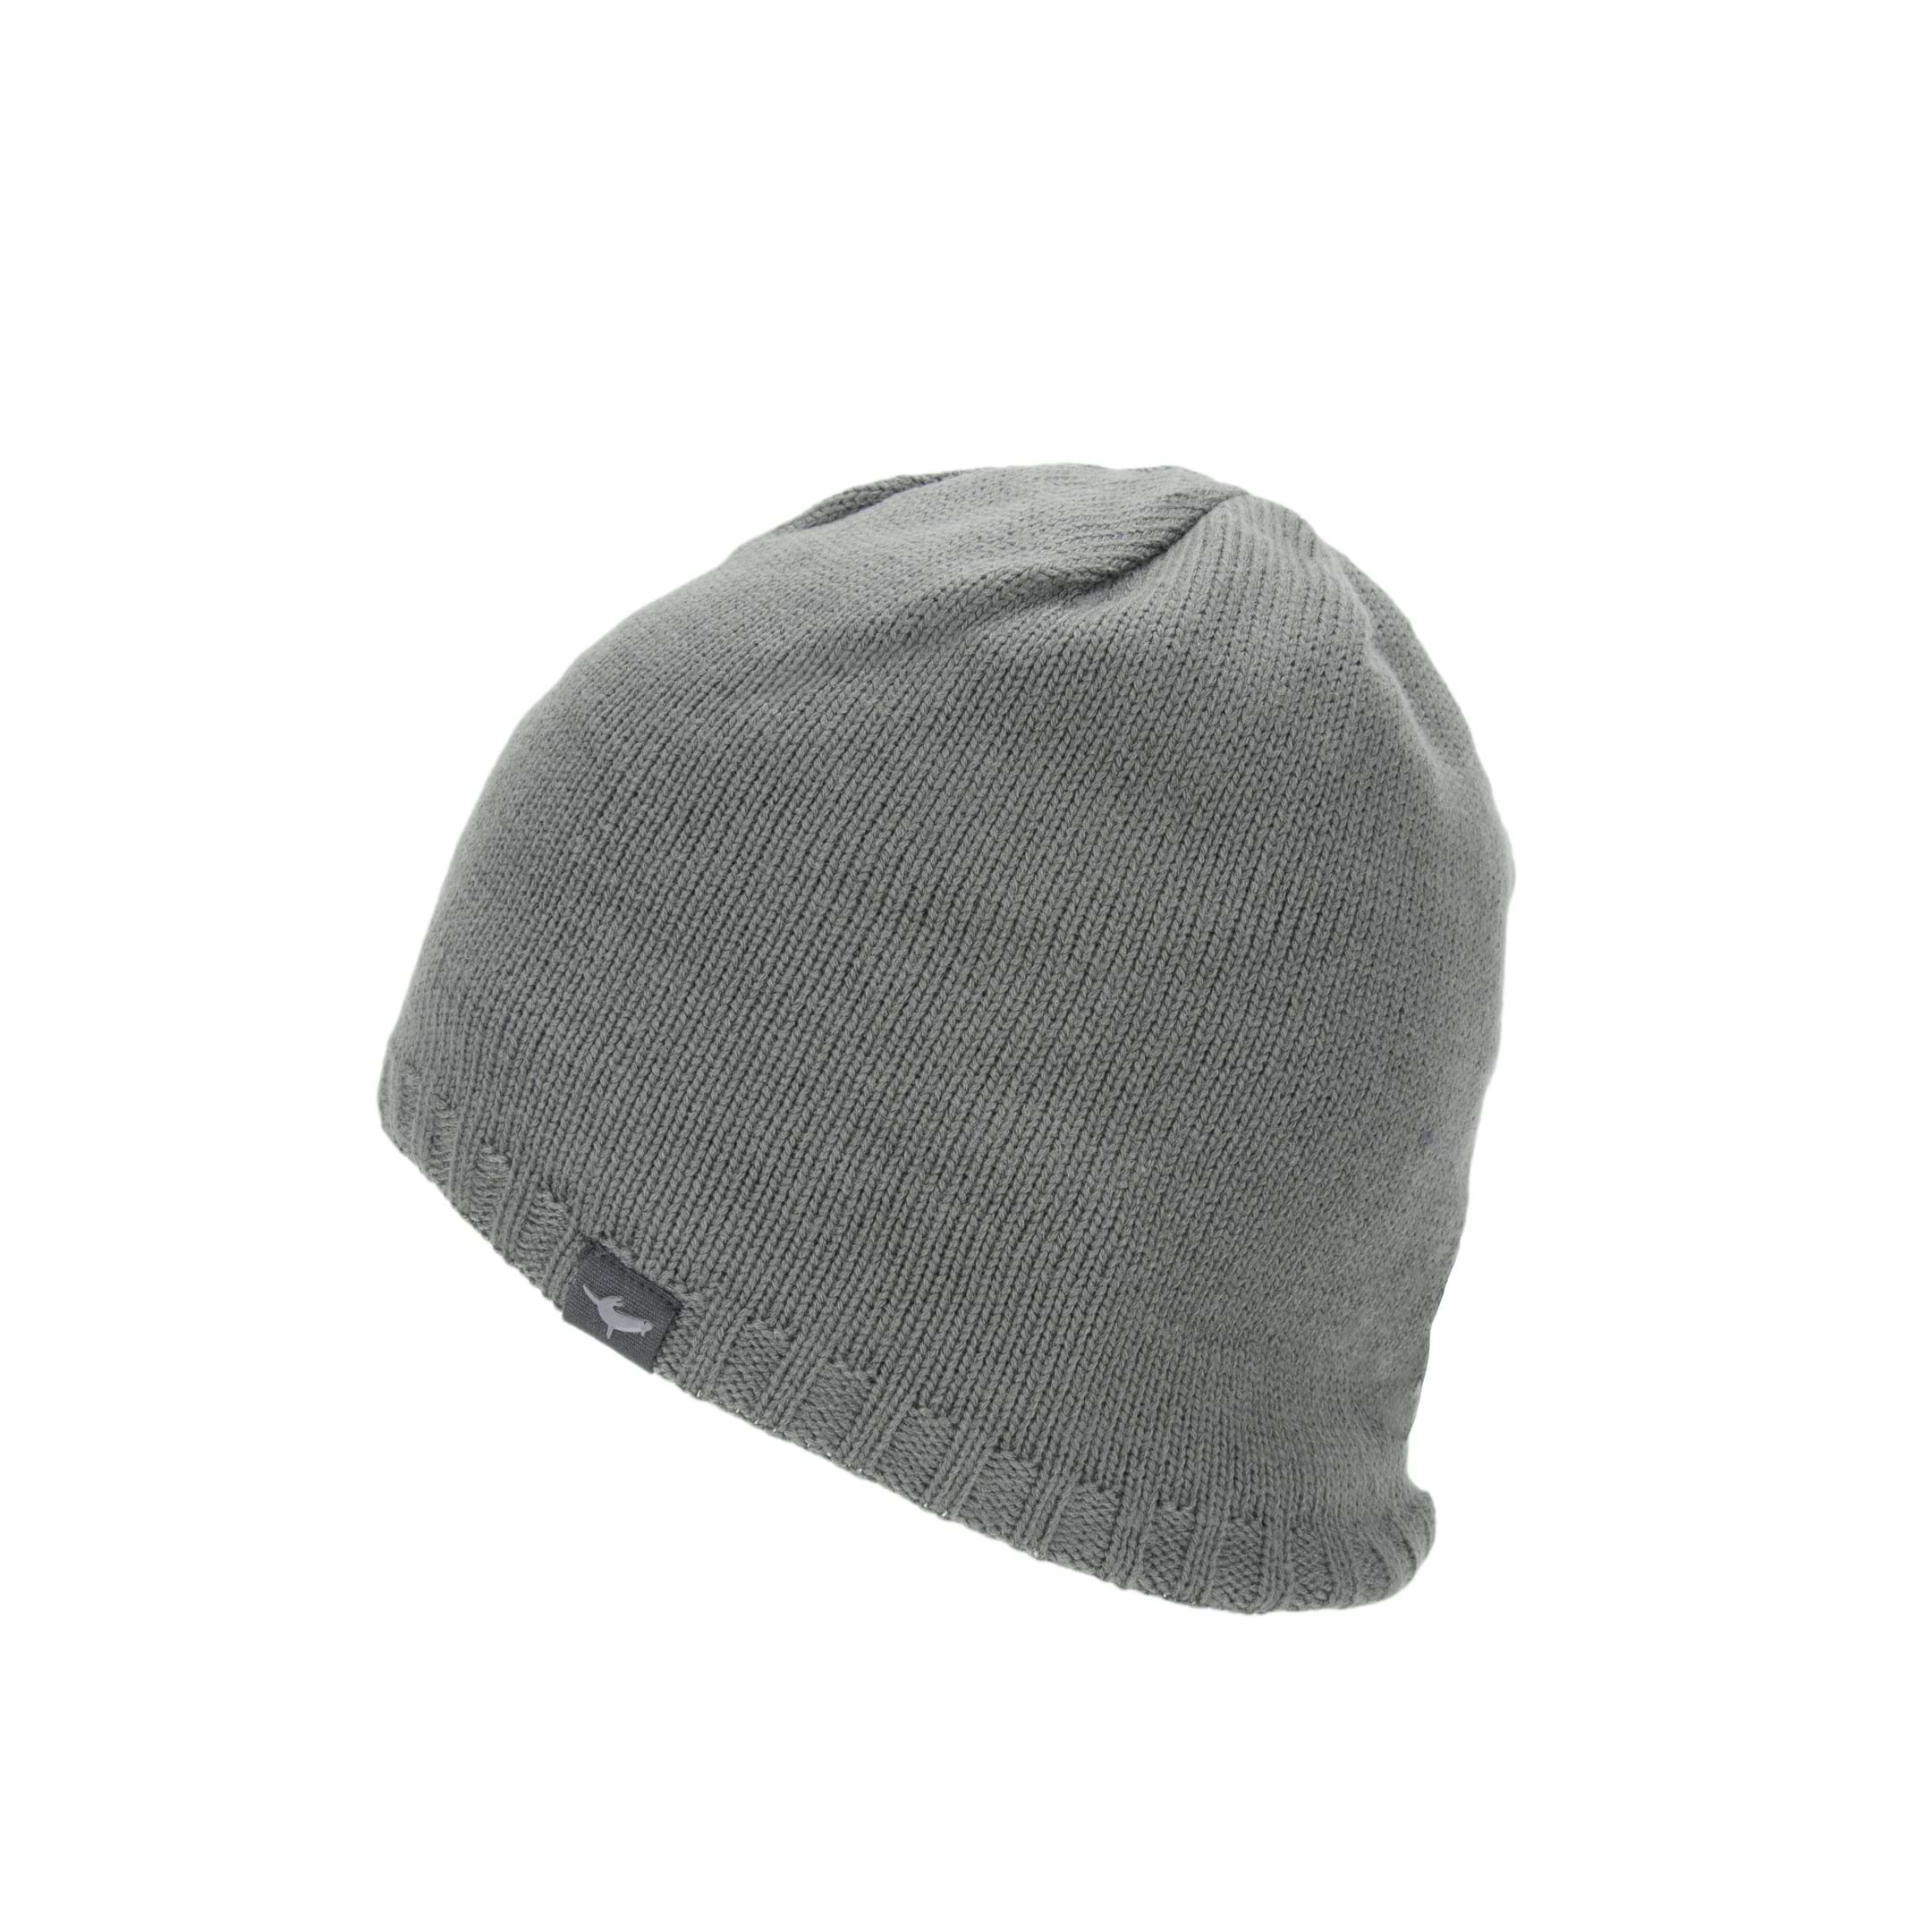 Waterproof Cold Weather Beanie Hat - Size: S / M - Color: Grey